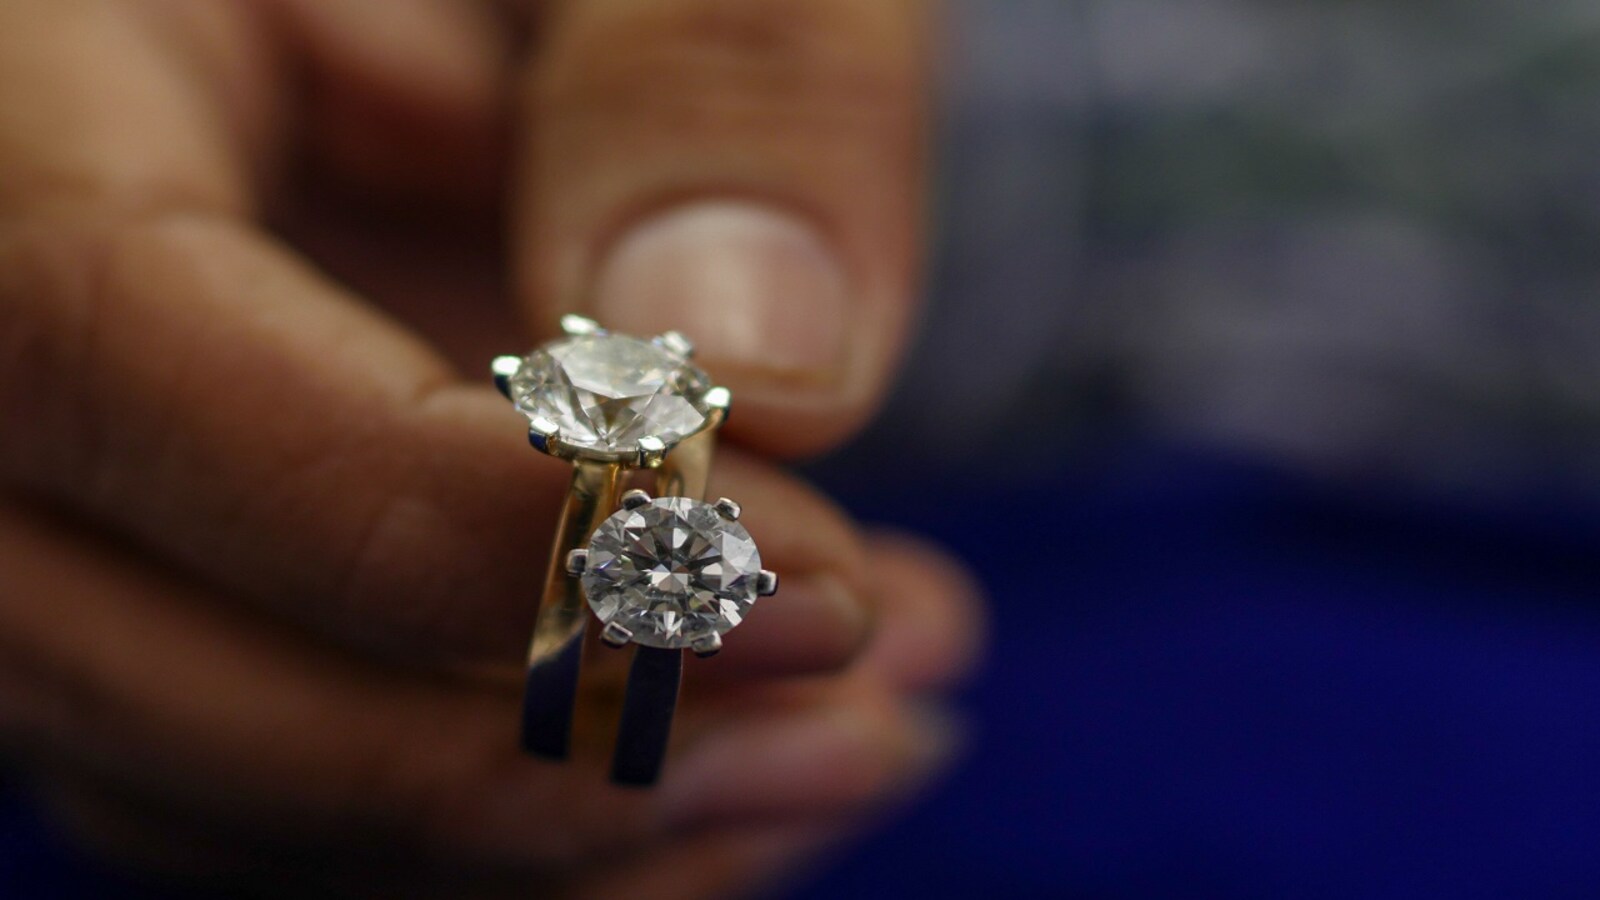 De Beers: Lab-made diamonds for less: Why De Beers' plan worries rivals -  The Economic Times